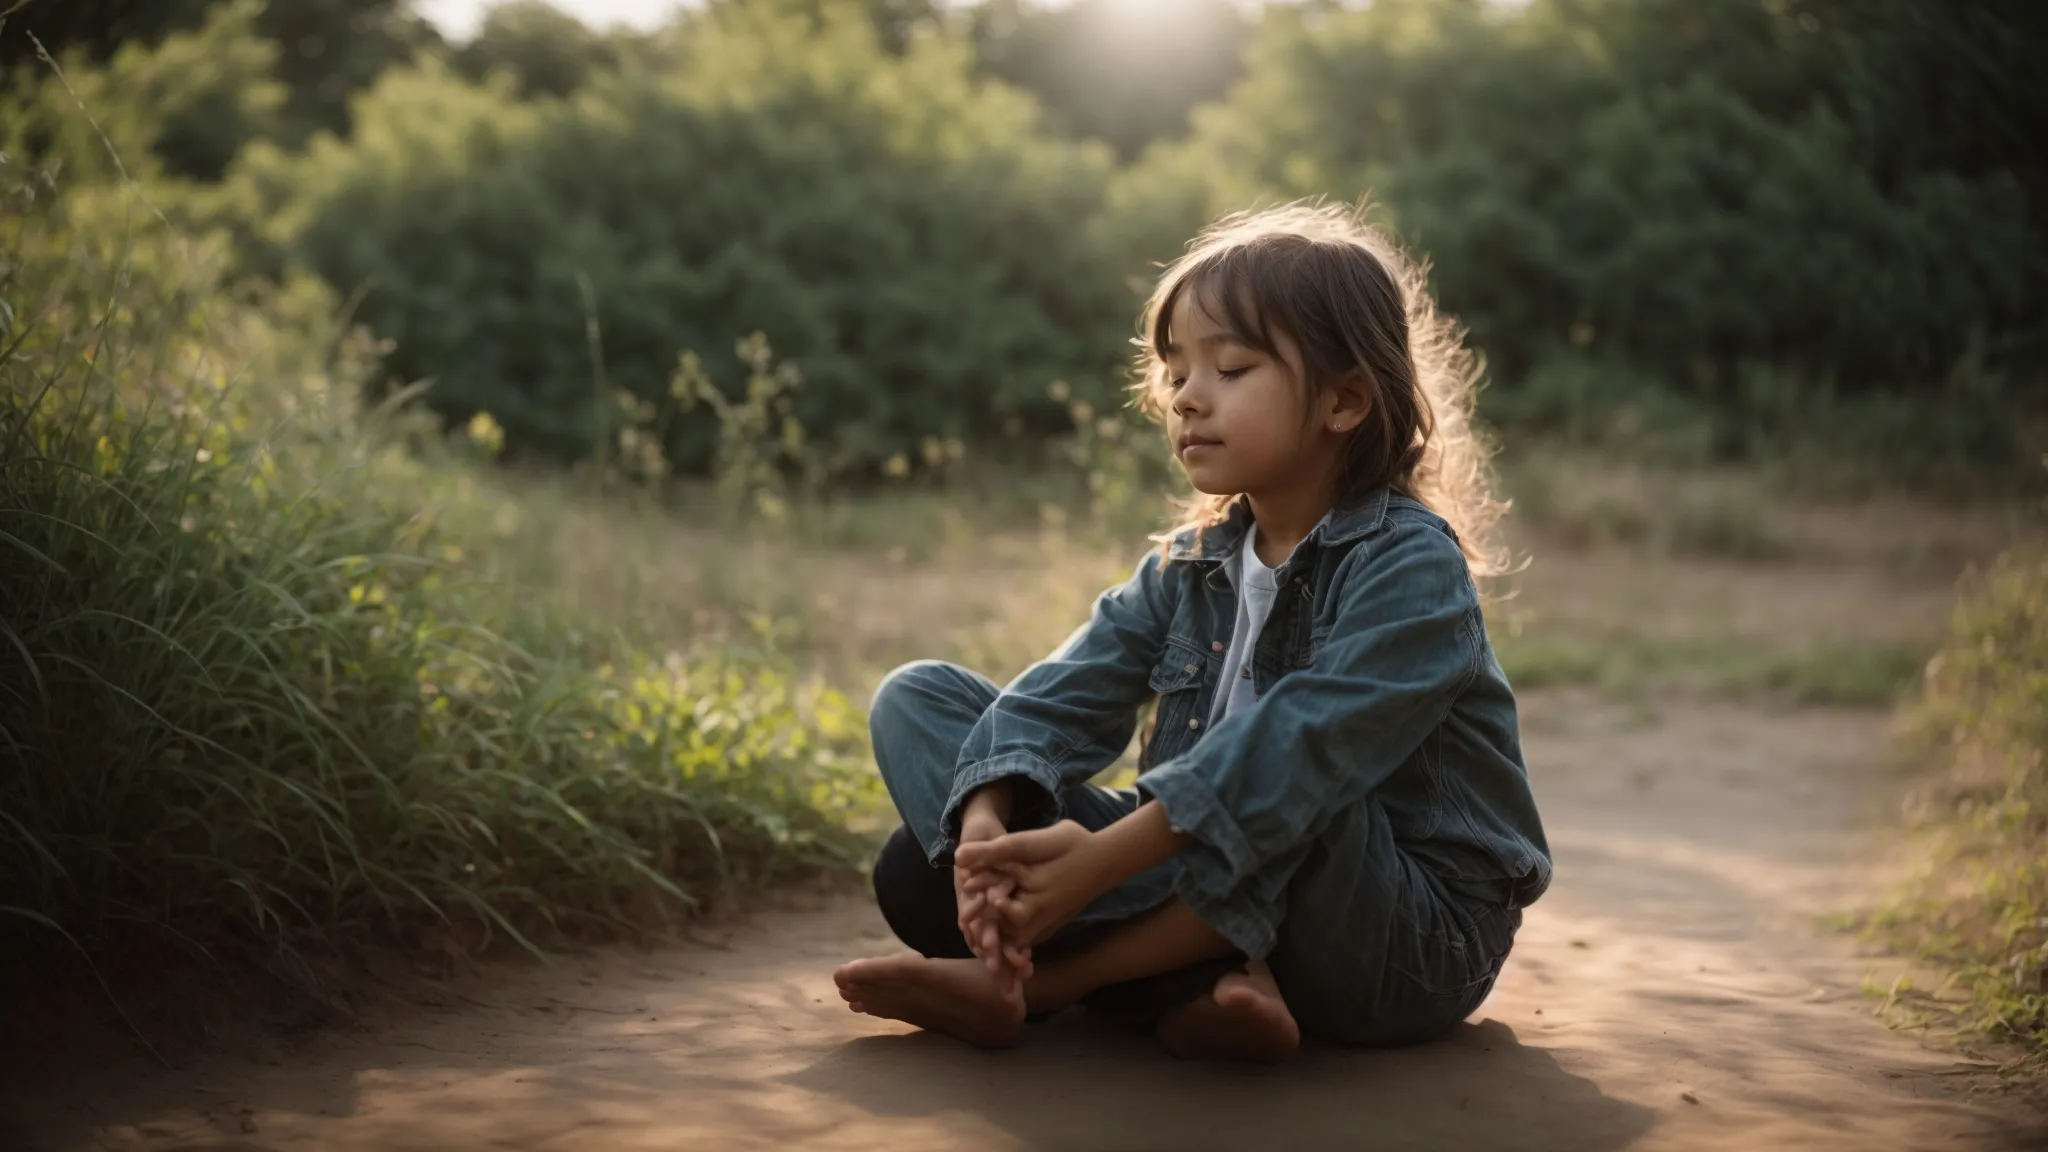 a child sits cross-legged in a tranquil outdoor setting, eyes closed in peaceful meditation.